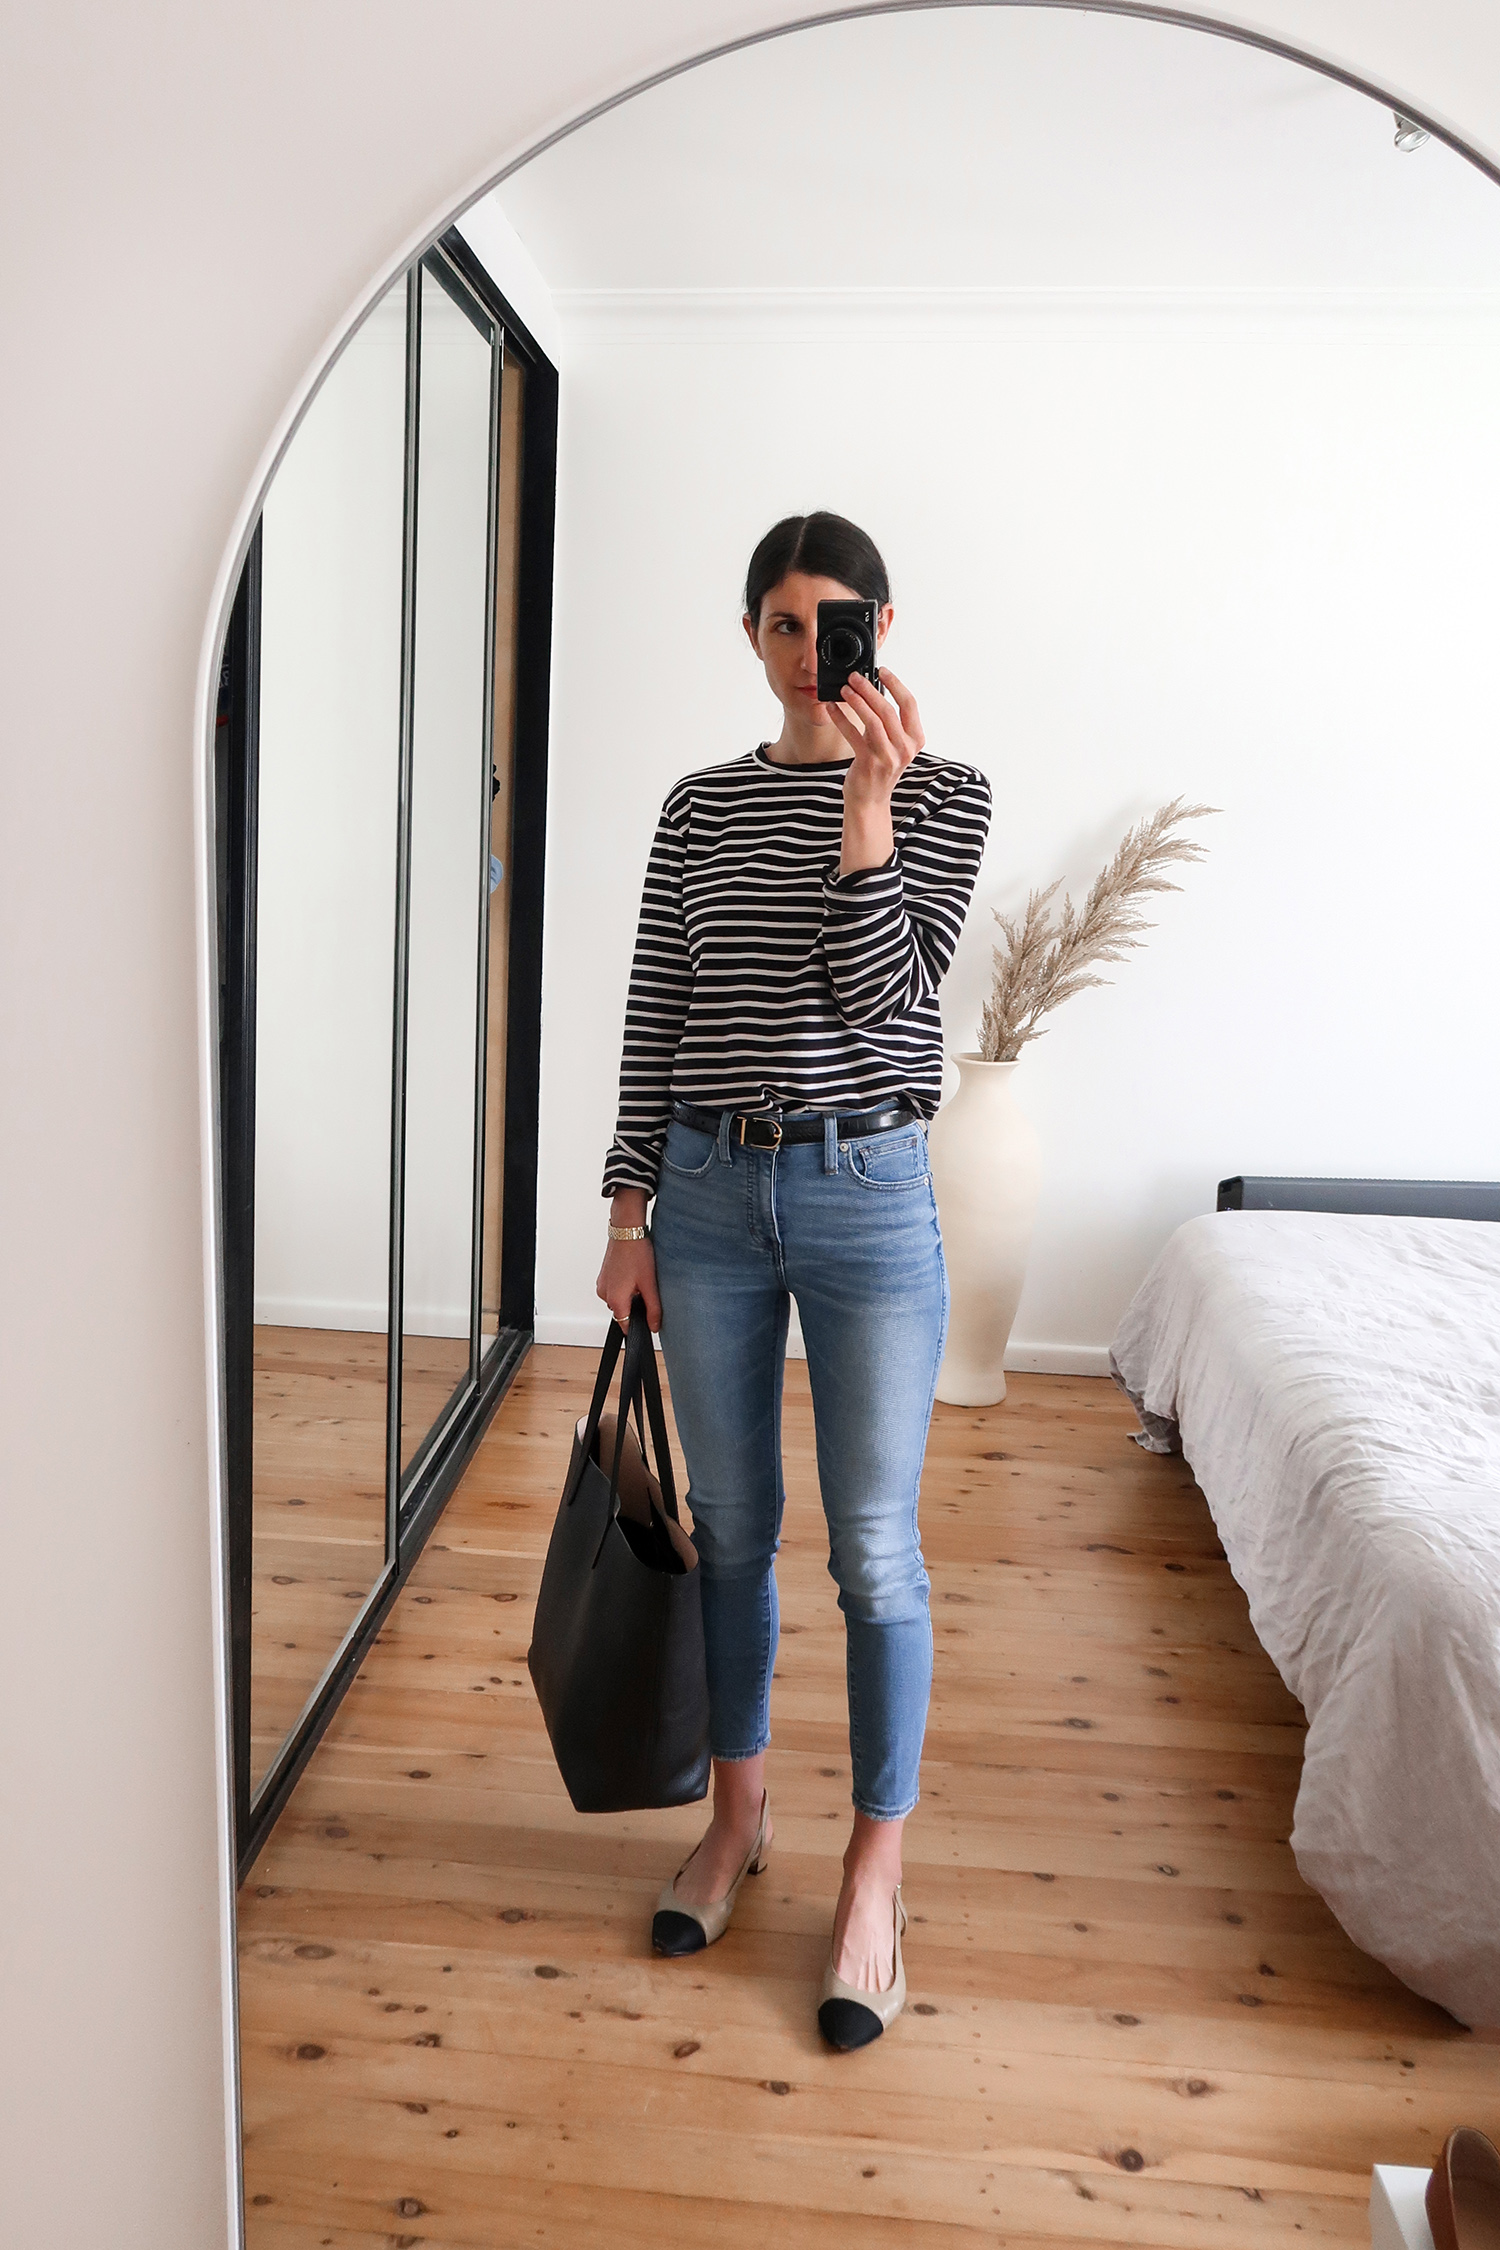 madewell constellation jeans